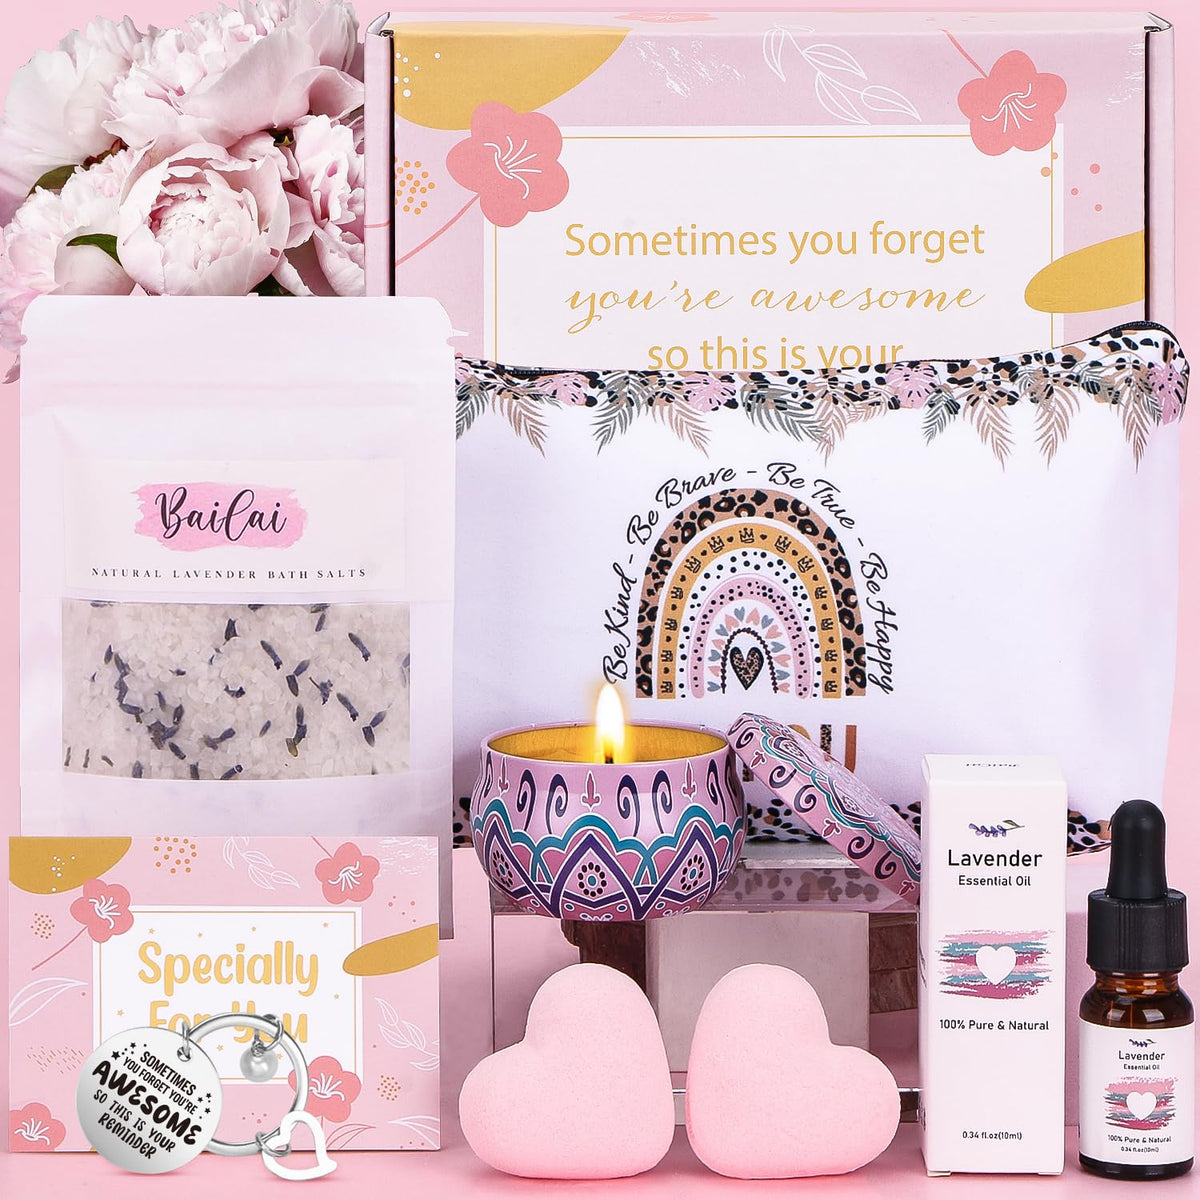 Birthday Pamper Gifts Box for Women Her, Unique Self Care package for Her Pamper Hampers Kit for Women, Relaxation Spa Gifts Sets Get Well Soon Gift Ideas for Women Best Friend, Mum, Sister, Wife